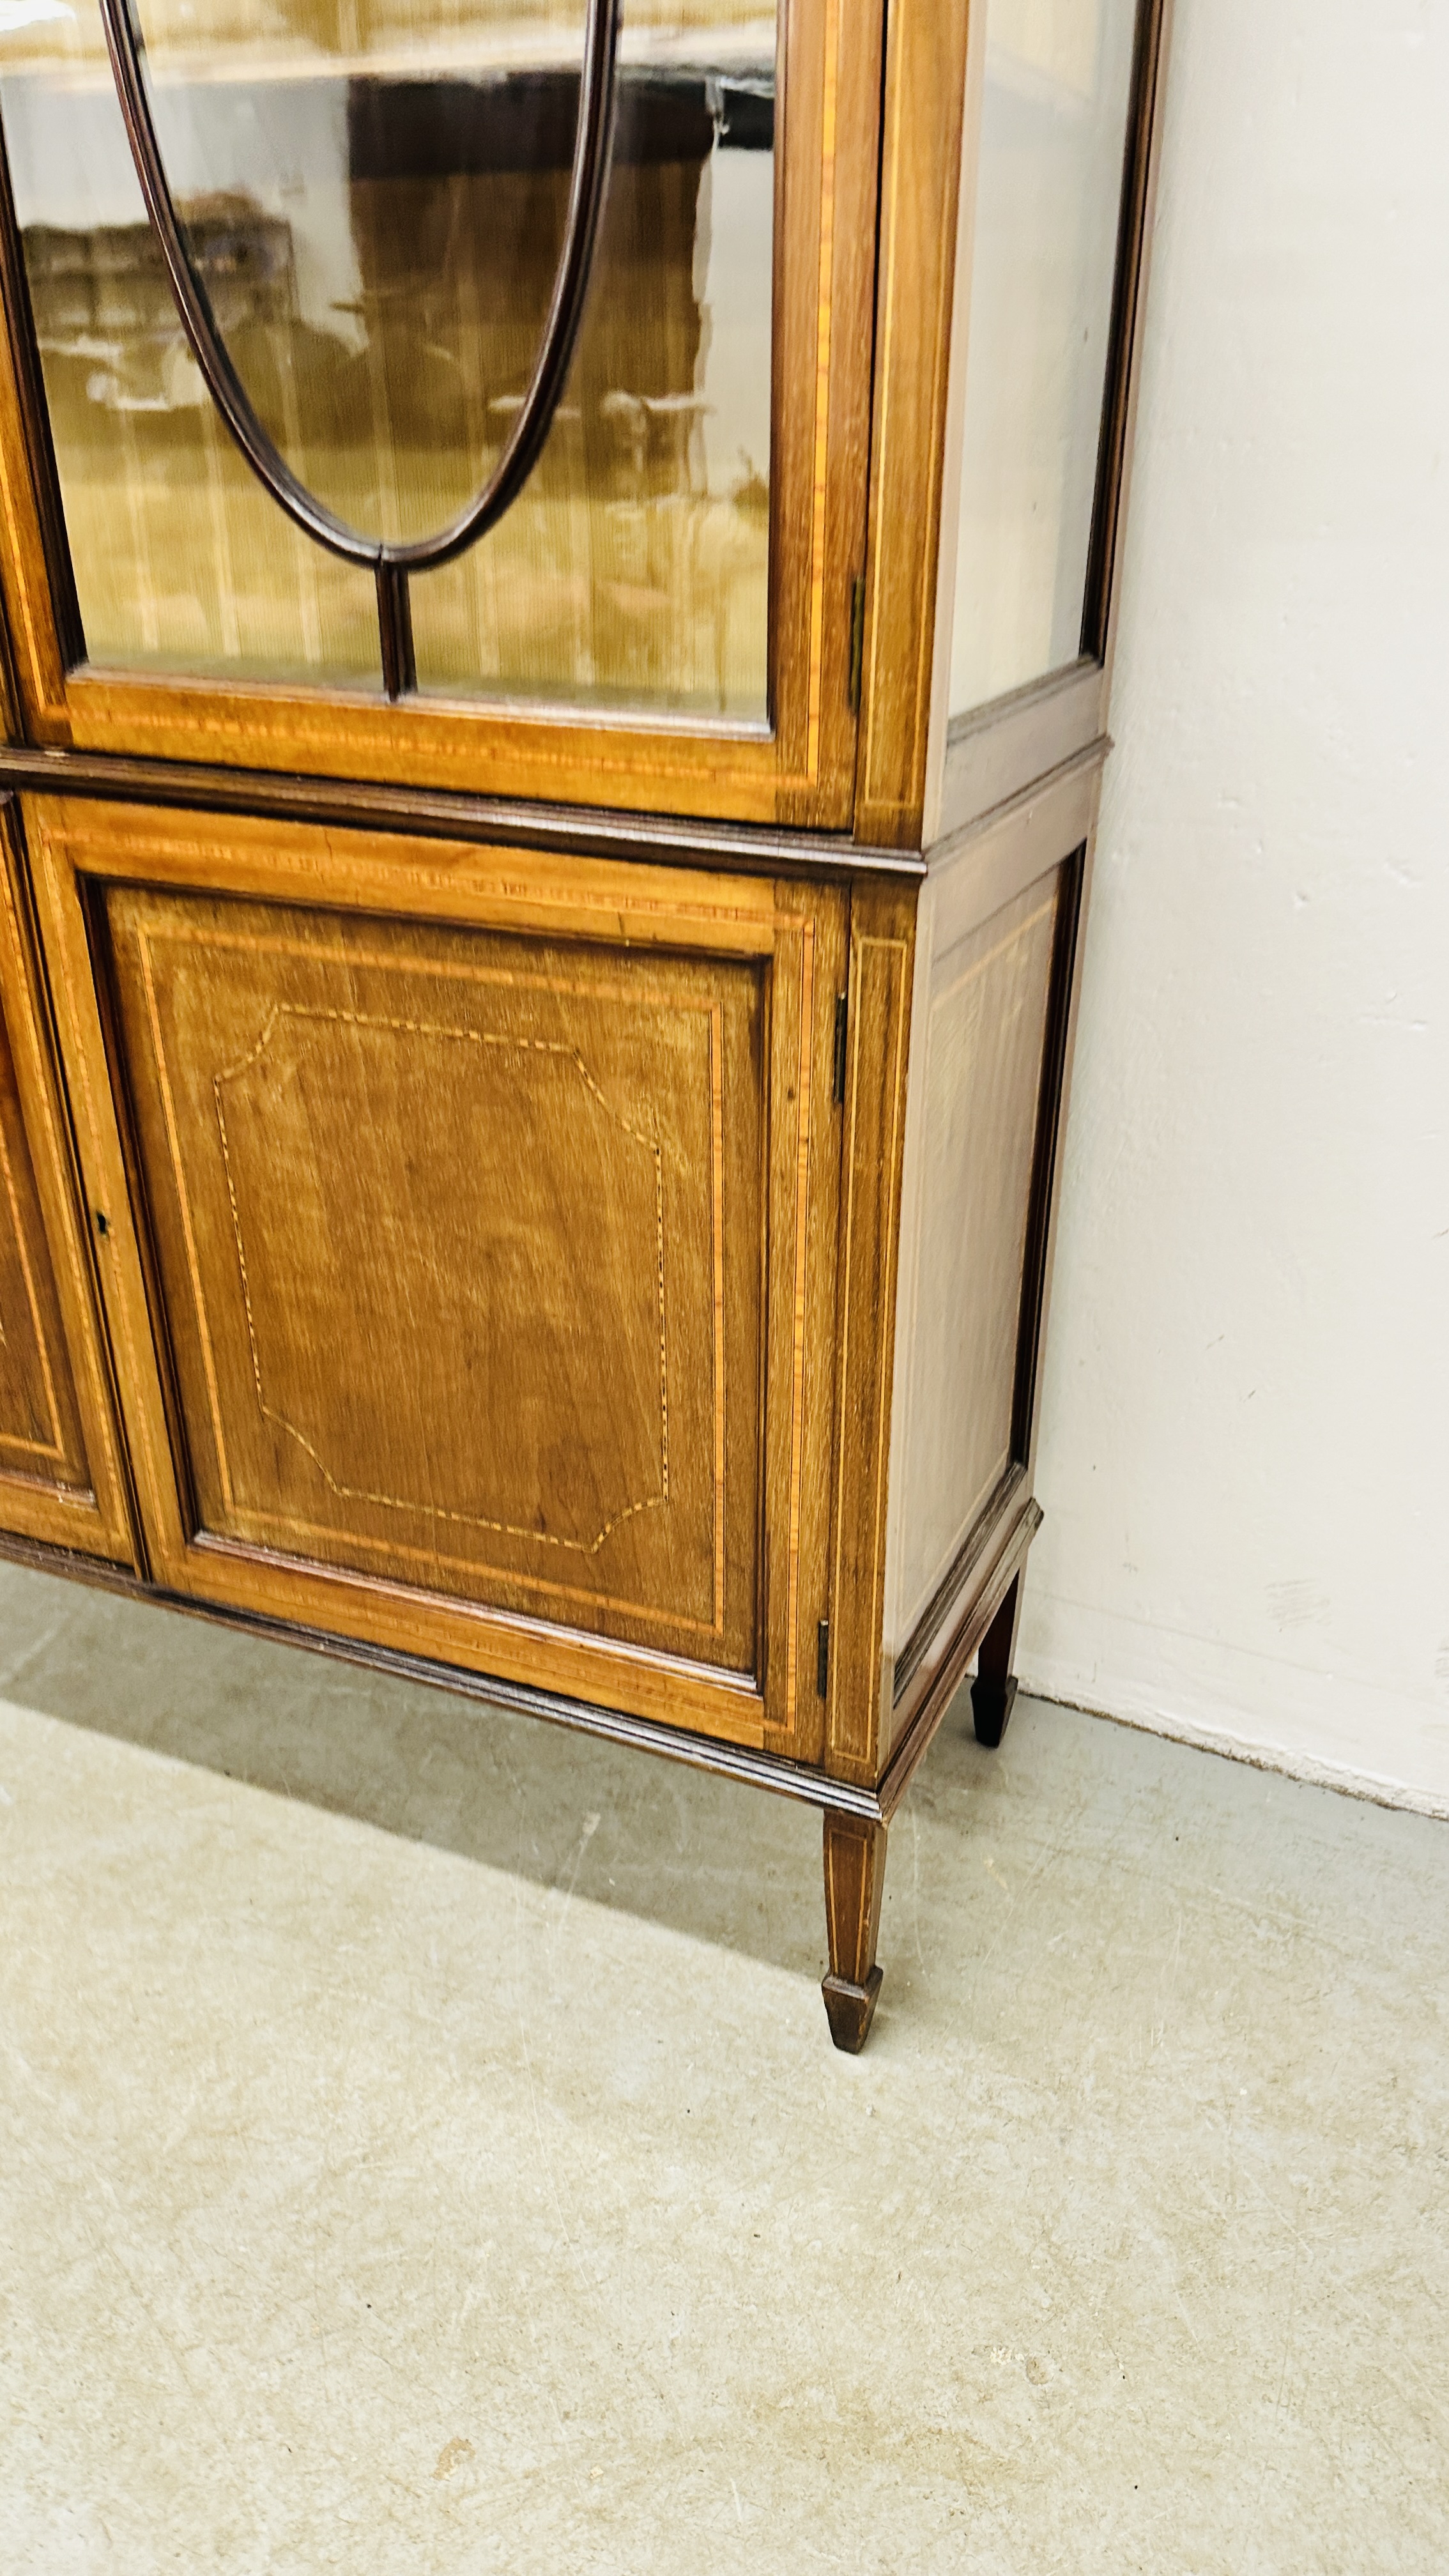 AN EDWARDIAN MAHOGANY TWO DOOR DISPLAY CABINET WITH CROSS BANDED INLAY AND TWO DOOR CUPBOARD BASE - - Image 8 of 10